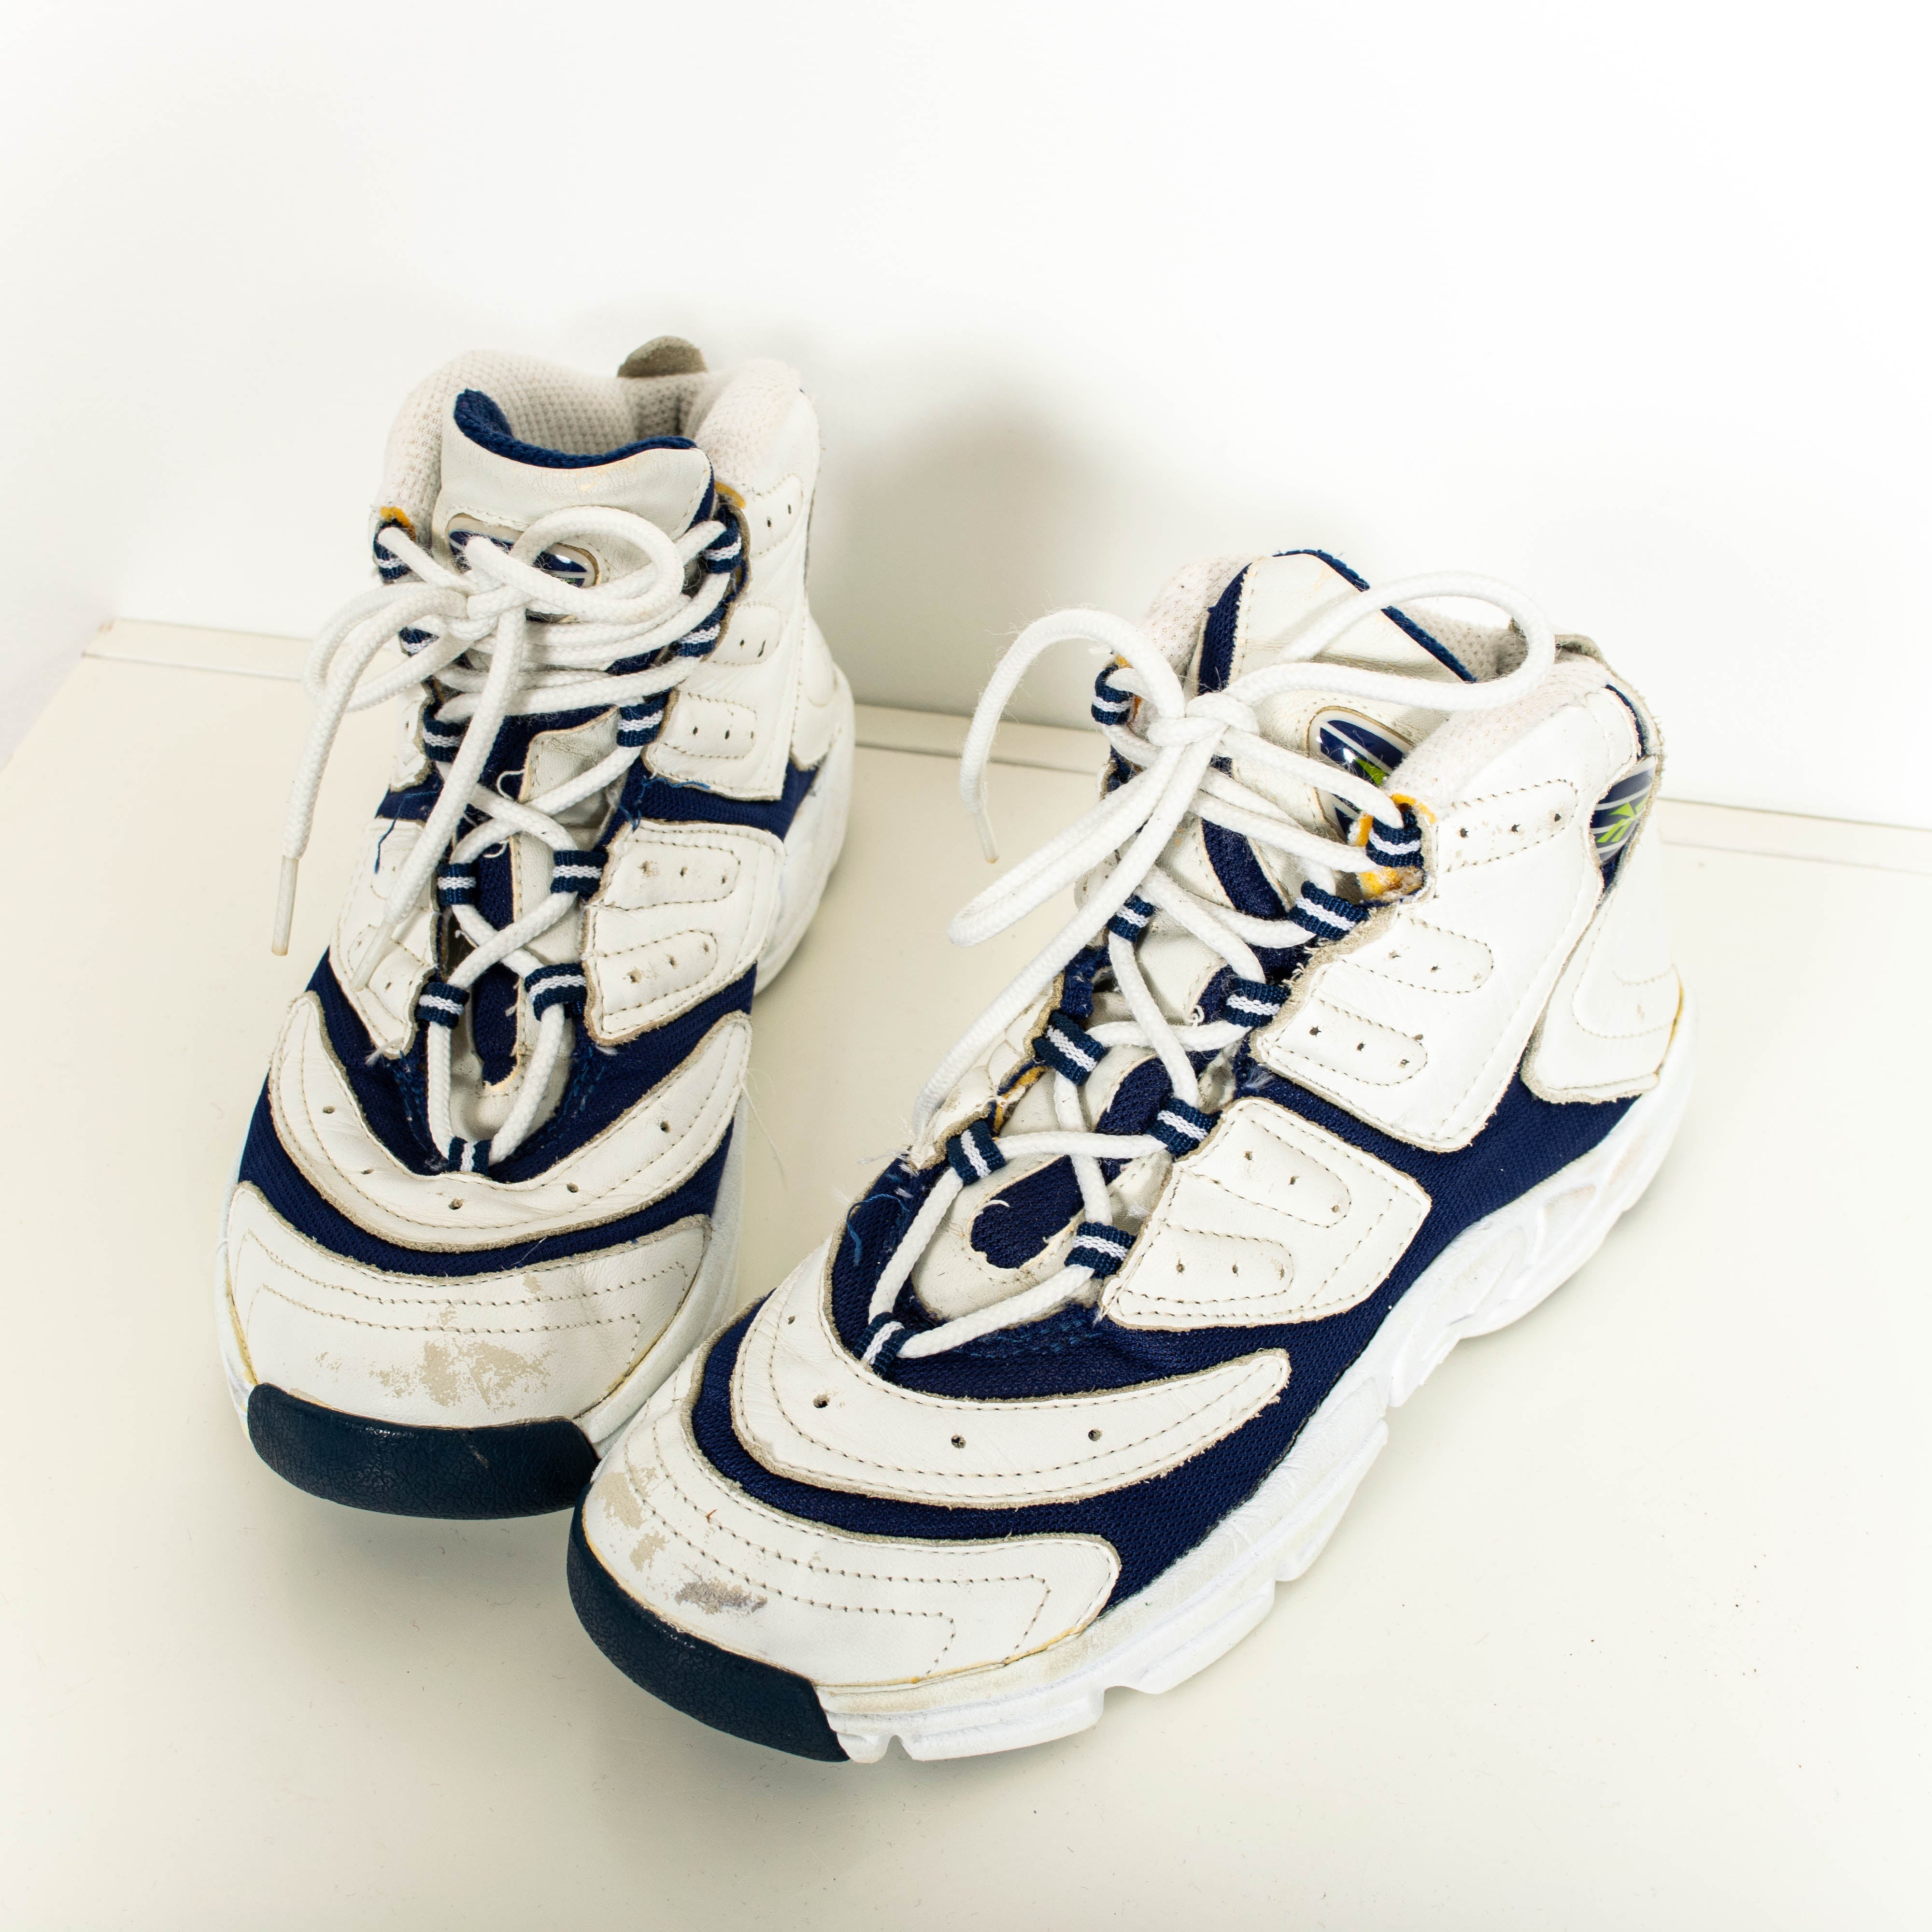 Vintage Reebok White Blue High Top Lace Up Sneakers Womens EU39